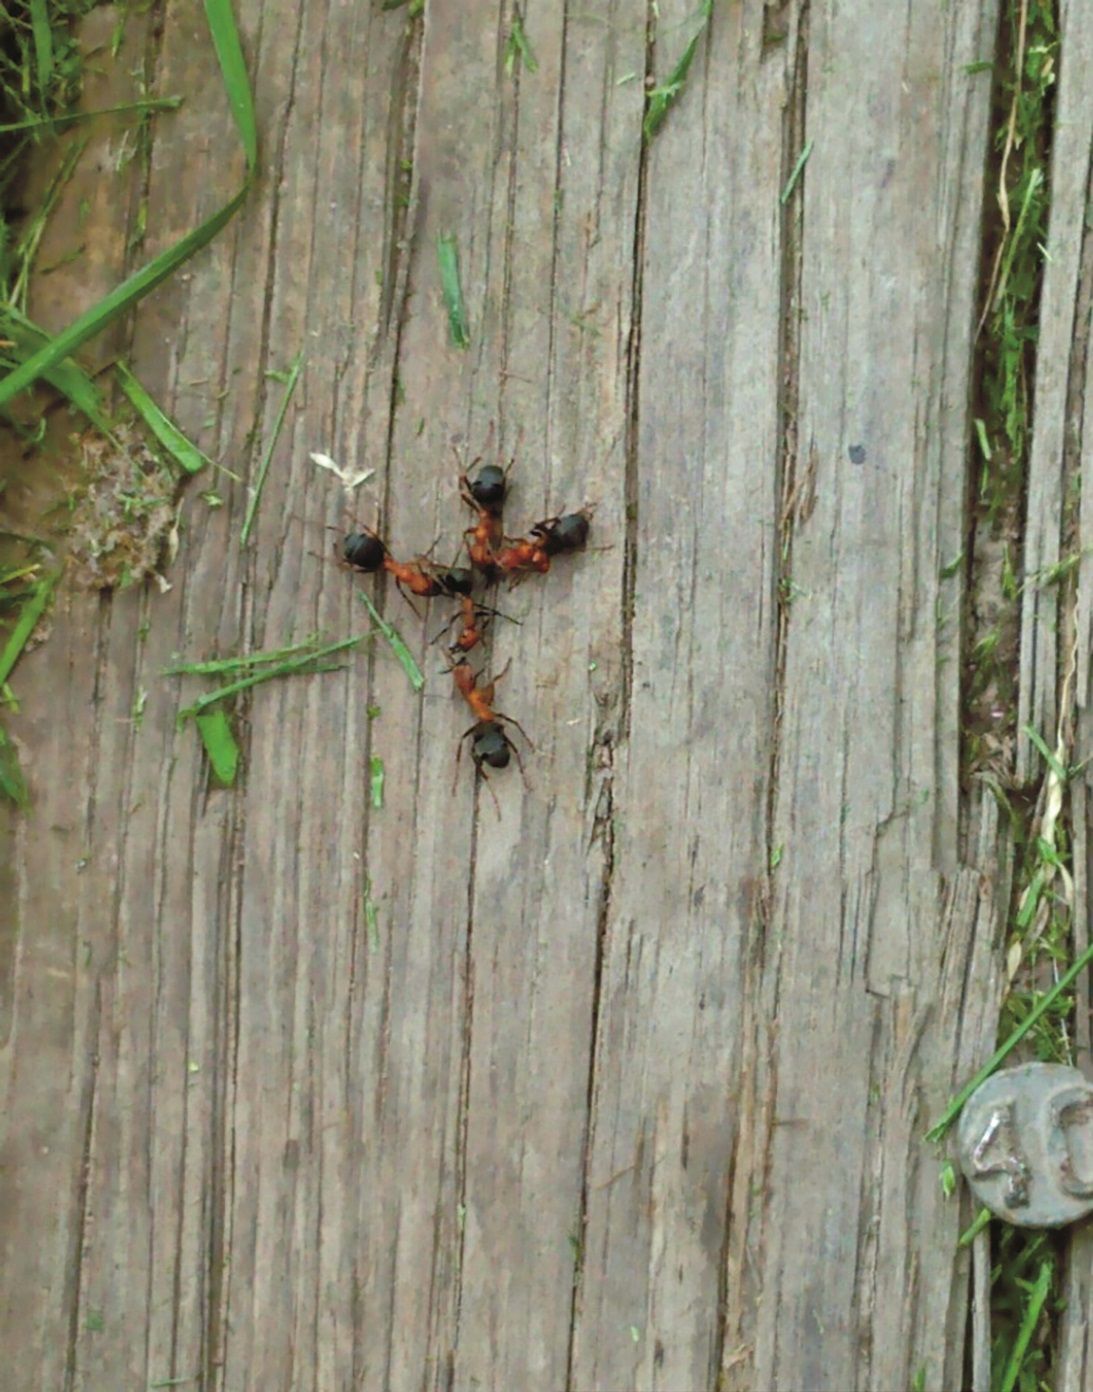 These ants made a cross that brought brought a farmer comfort (photo courtesy Susan Topham)